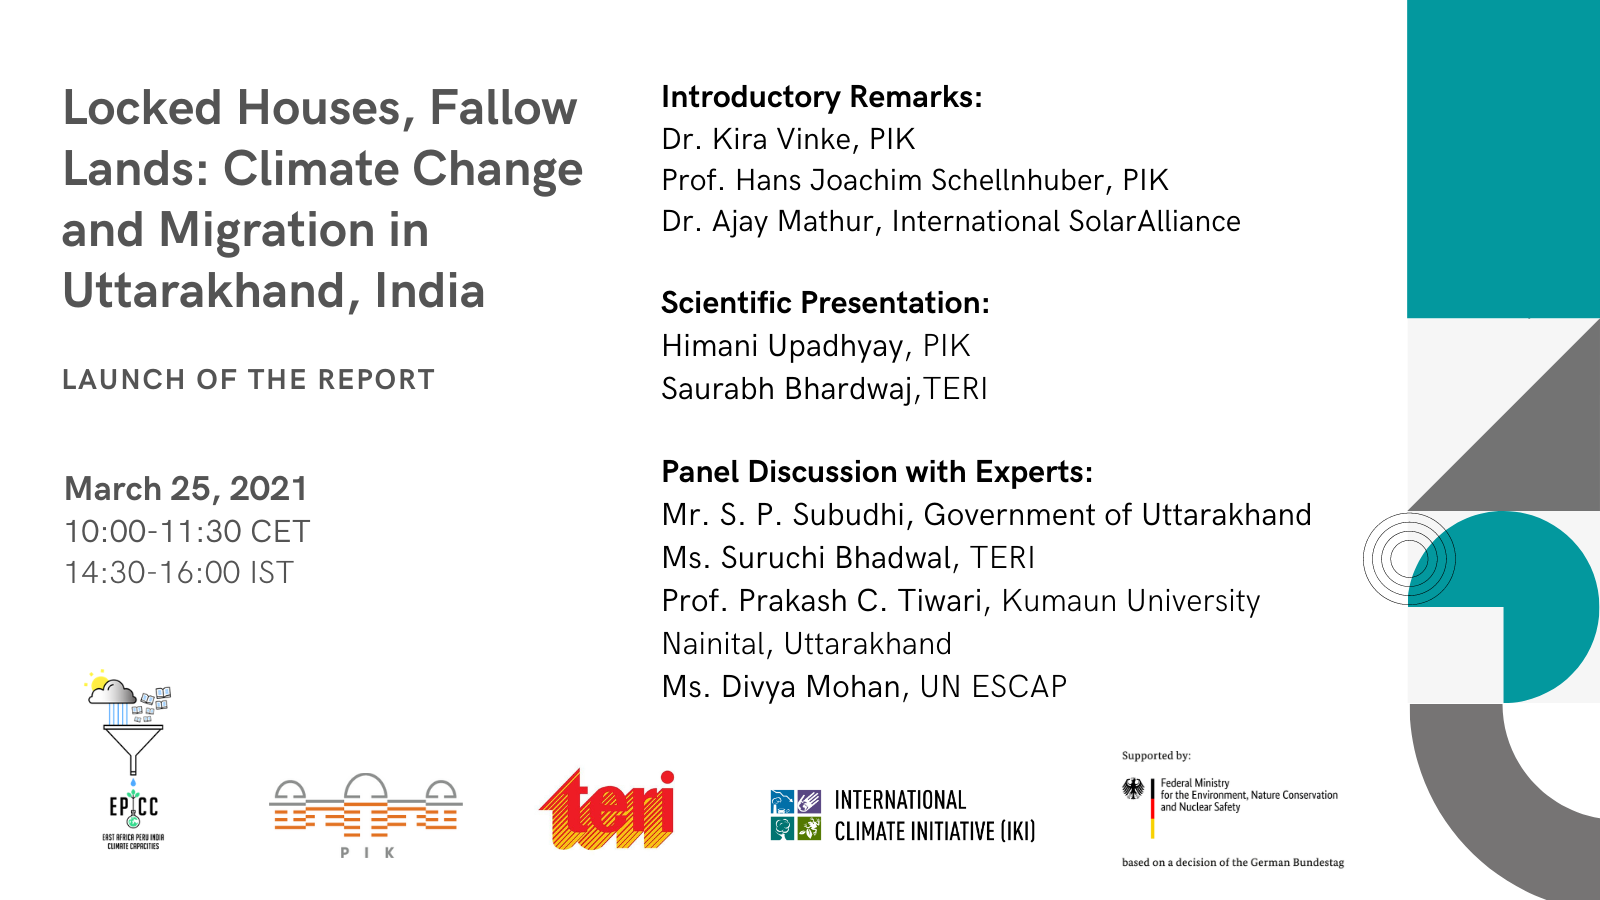 Virtual Launch of the Study: “Locked Houses, Fallow Lands: Climate Change and Migration in Uttarakhand, India”